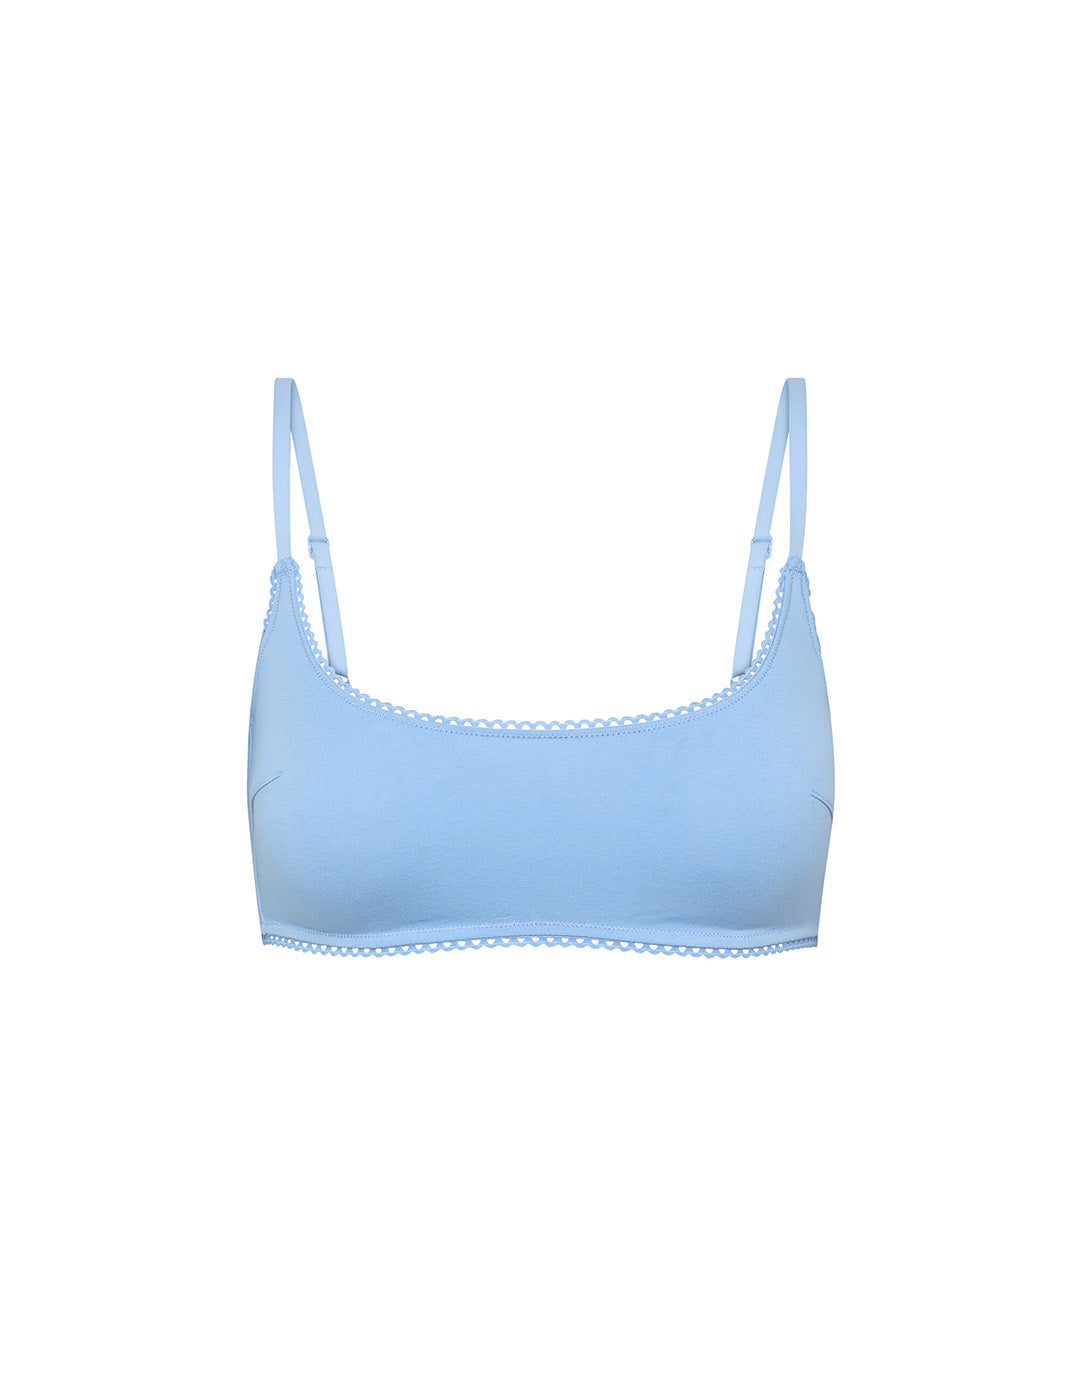 AR Fasion Jalidar Cotton Non Padded Full Coverage Bra For Girls And Women  You Will Definitely Love It